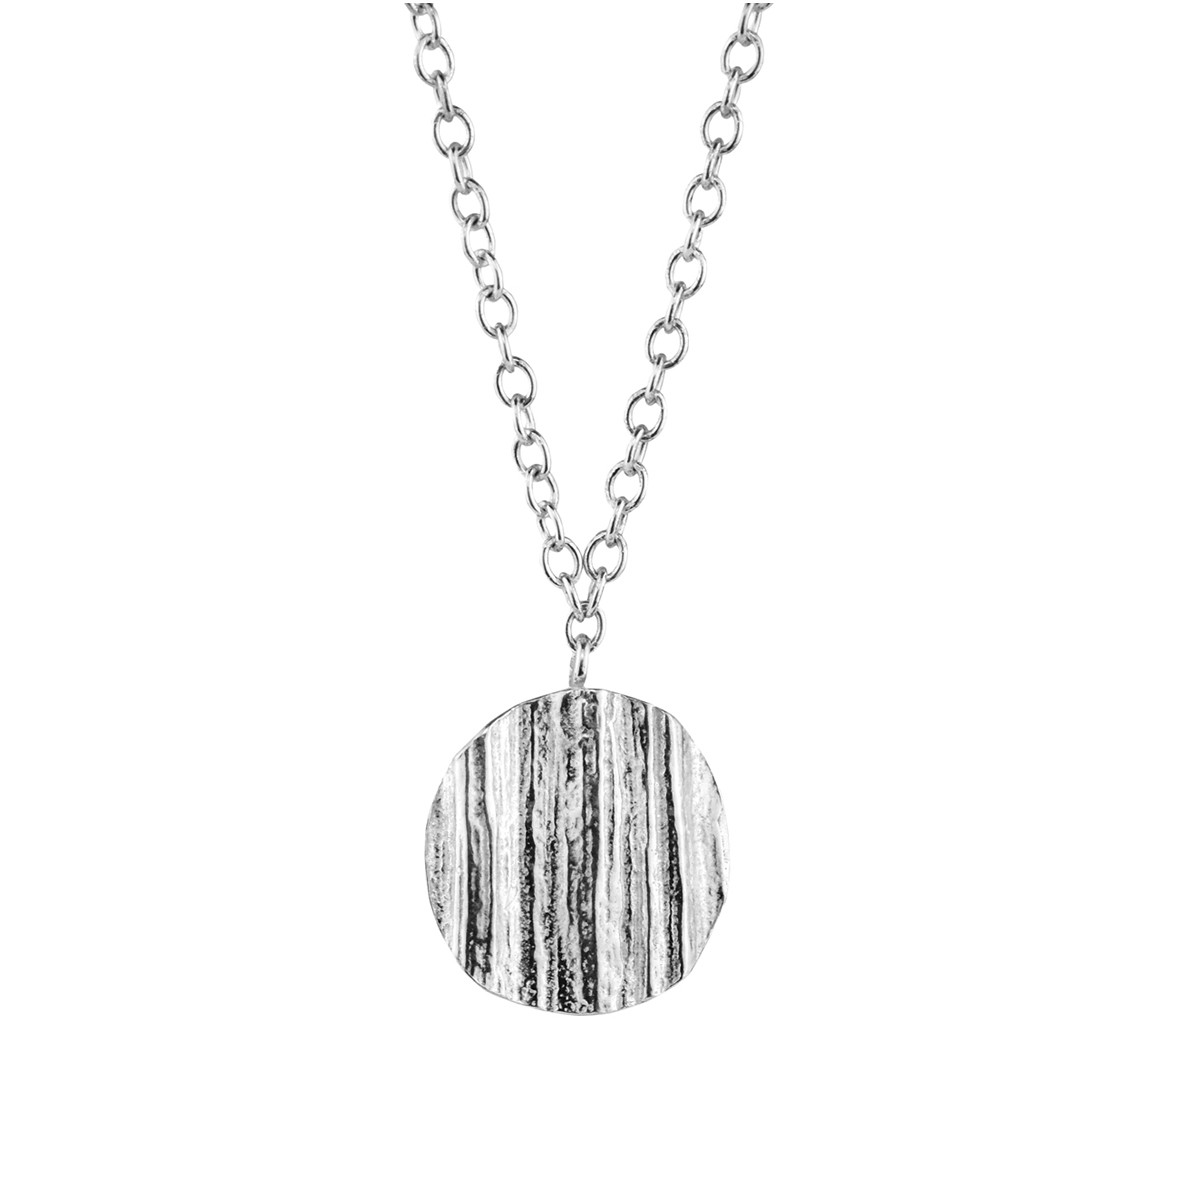 Issy White: Lined Oak Disc Necklace, tomfoolery